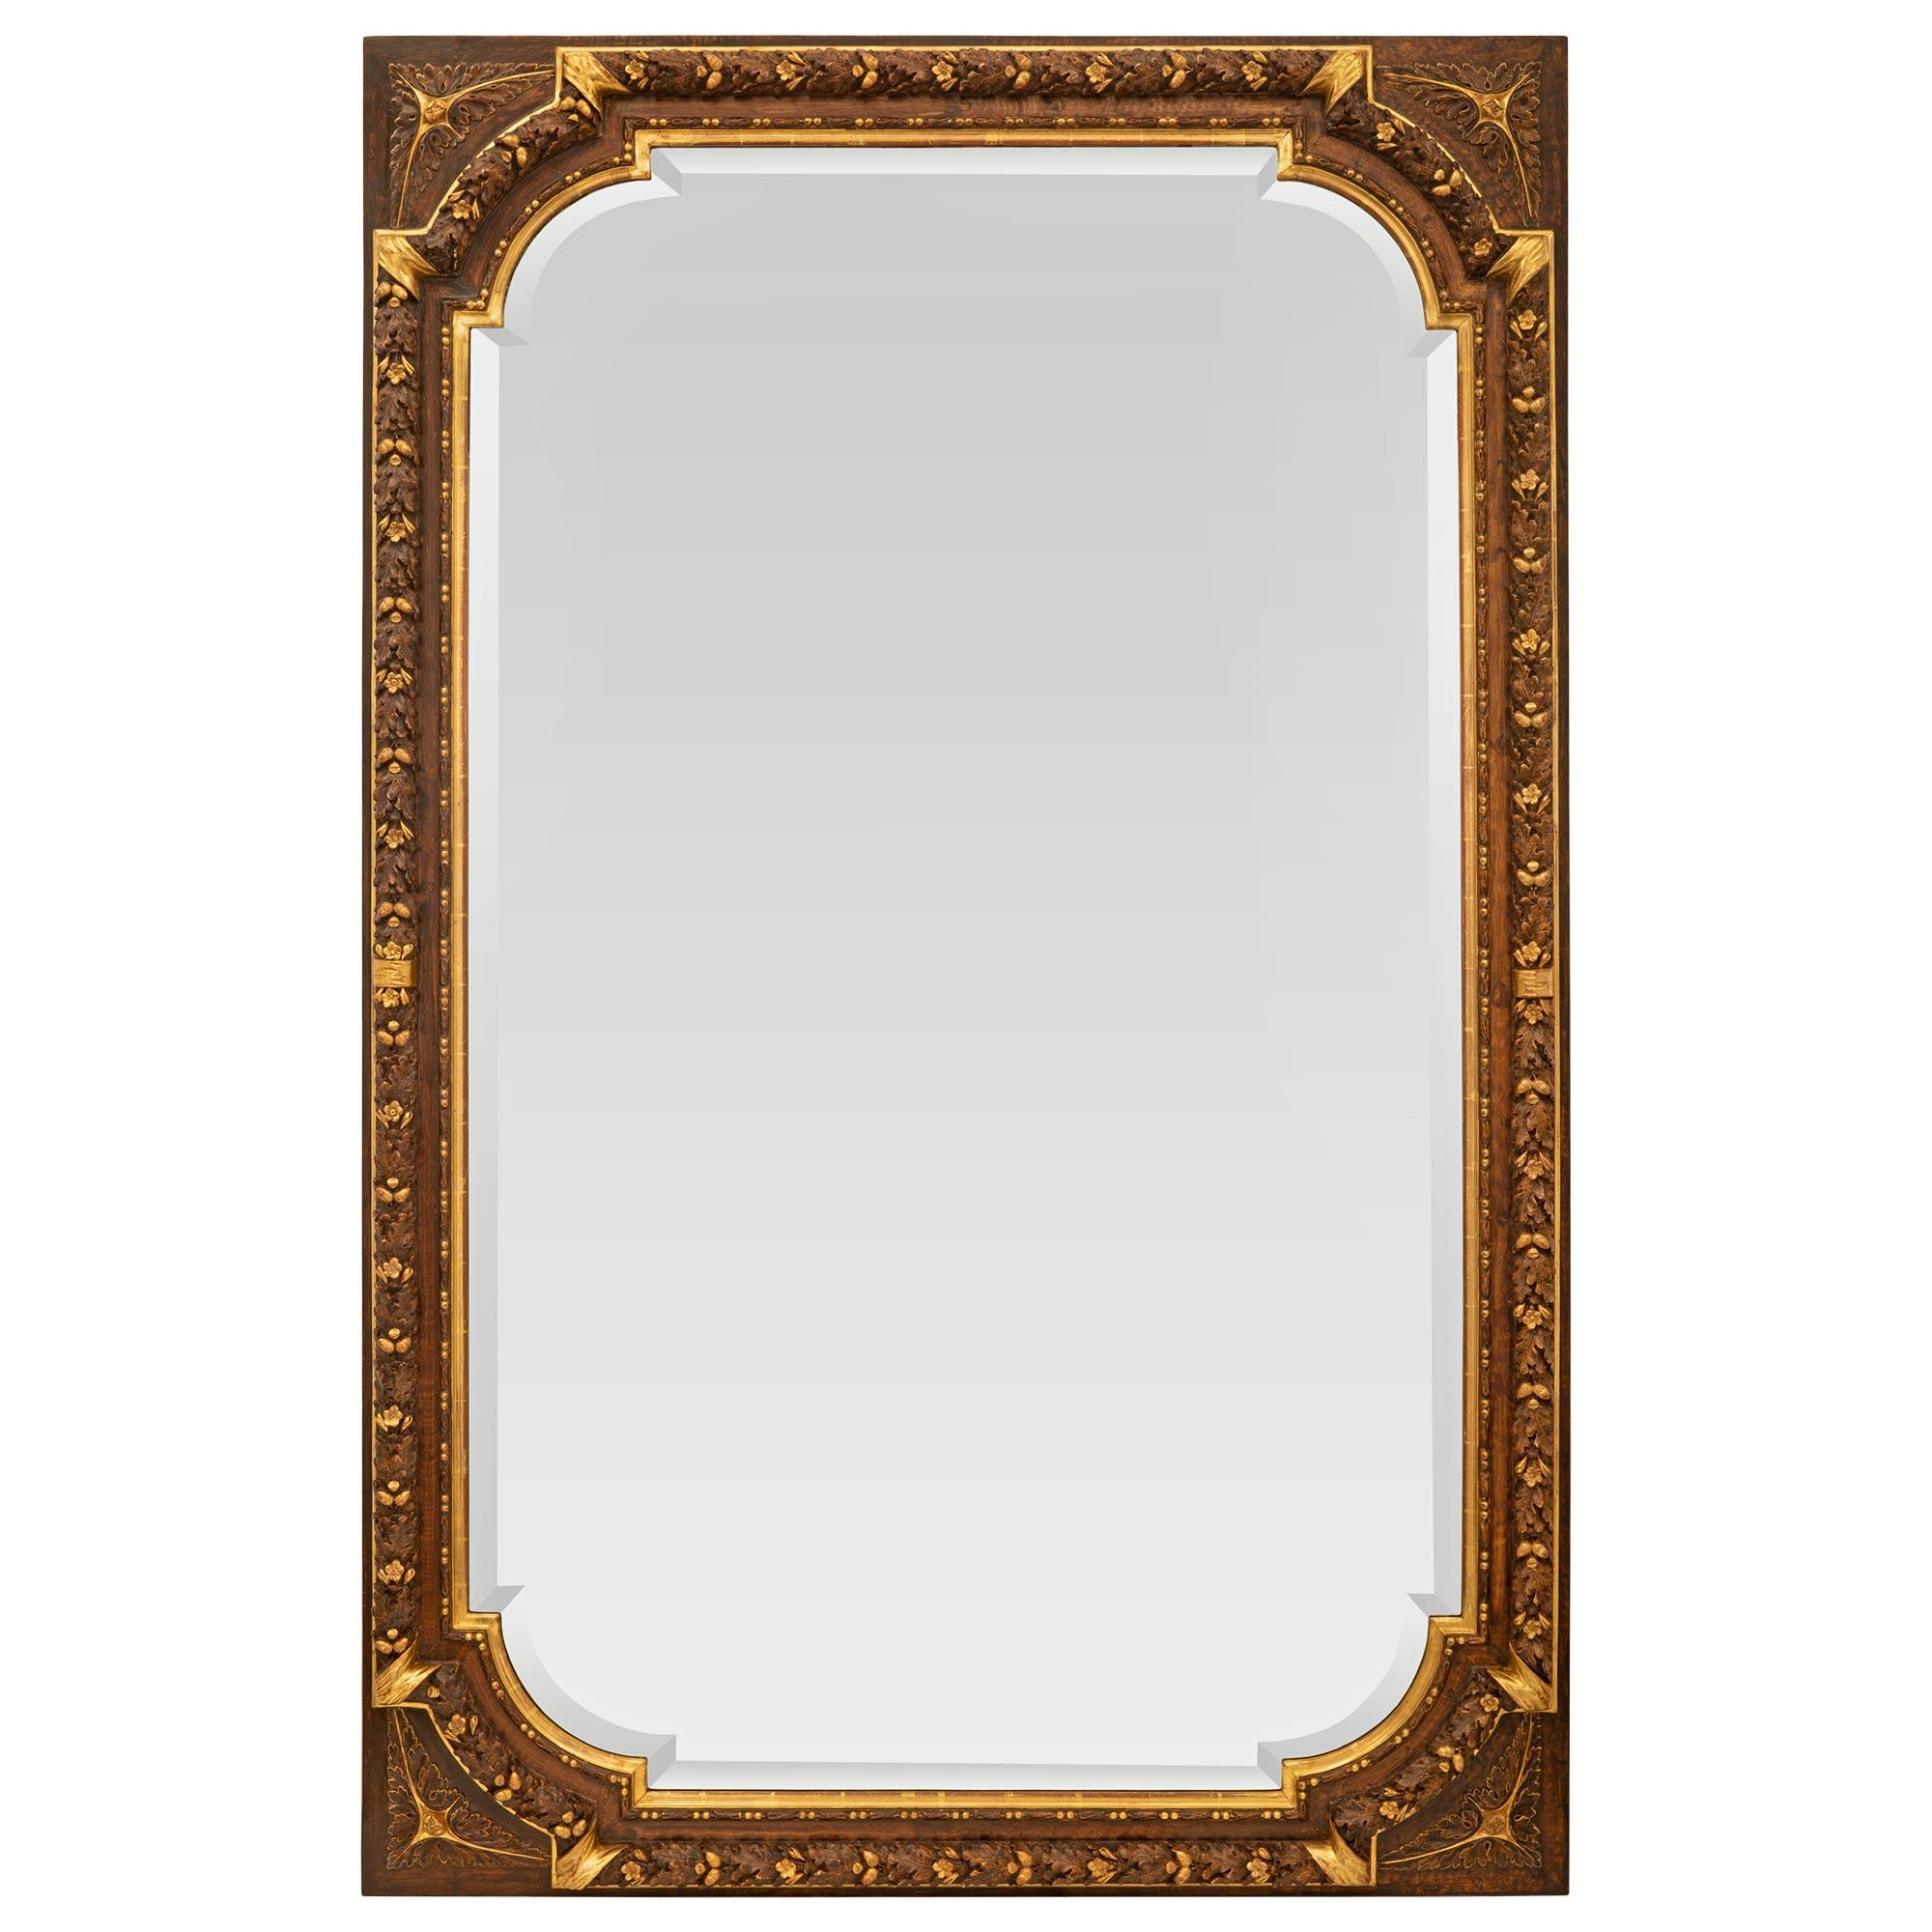 A most elegant and very unique French early 19th century Louis XVI st. patinated wood and giltwood mirror. The mirror retains its original beveled mirror plate framed within a fine wrap around mottled and beaded border. The frame displays striking